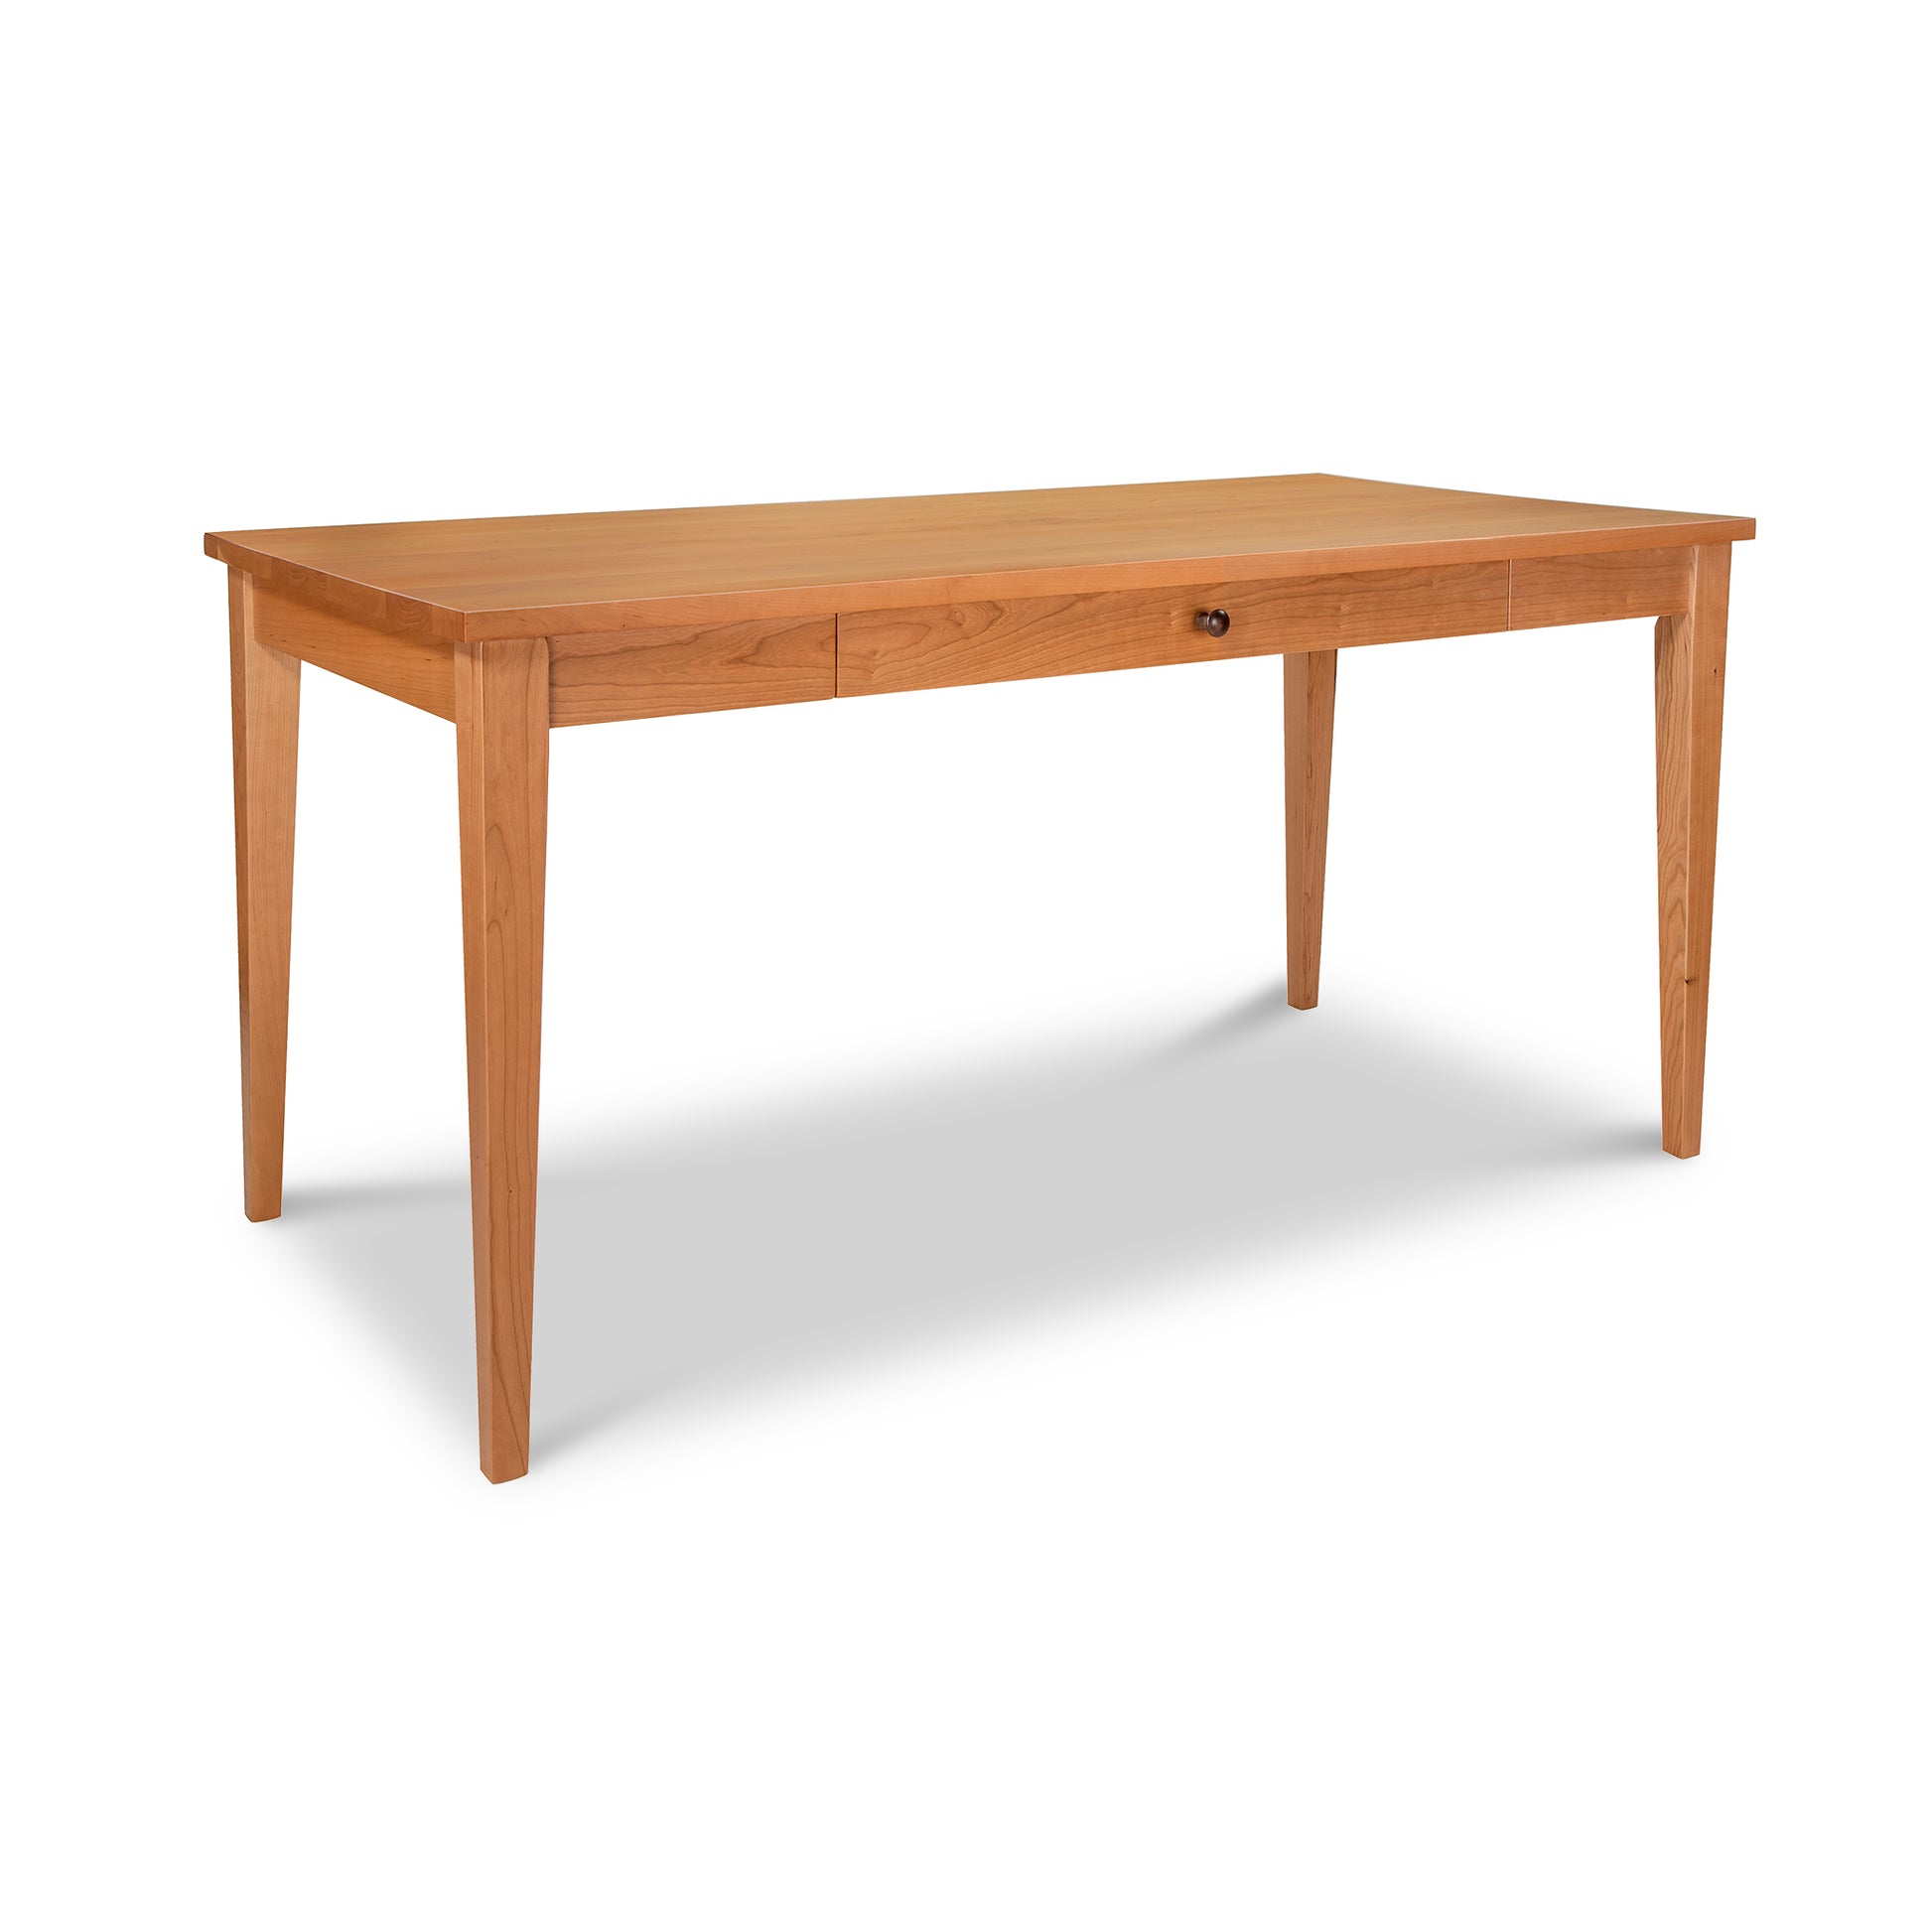 An eco-friendly wooden Classic Shaker Writing Desk with a solid wood top by Lyndon Furniture.